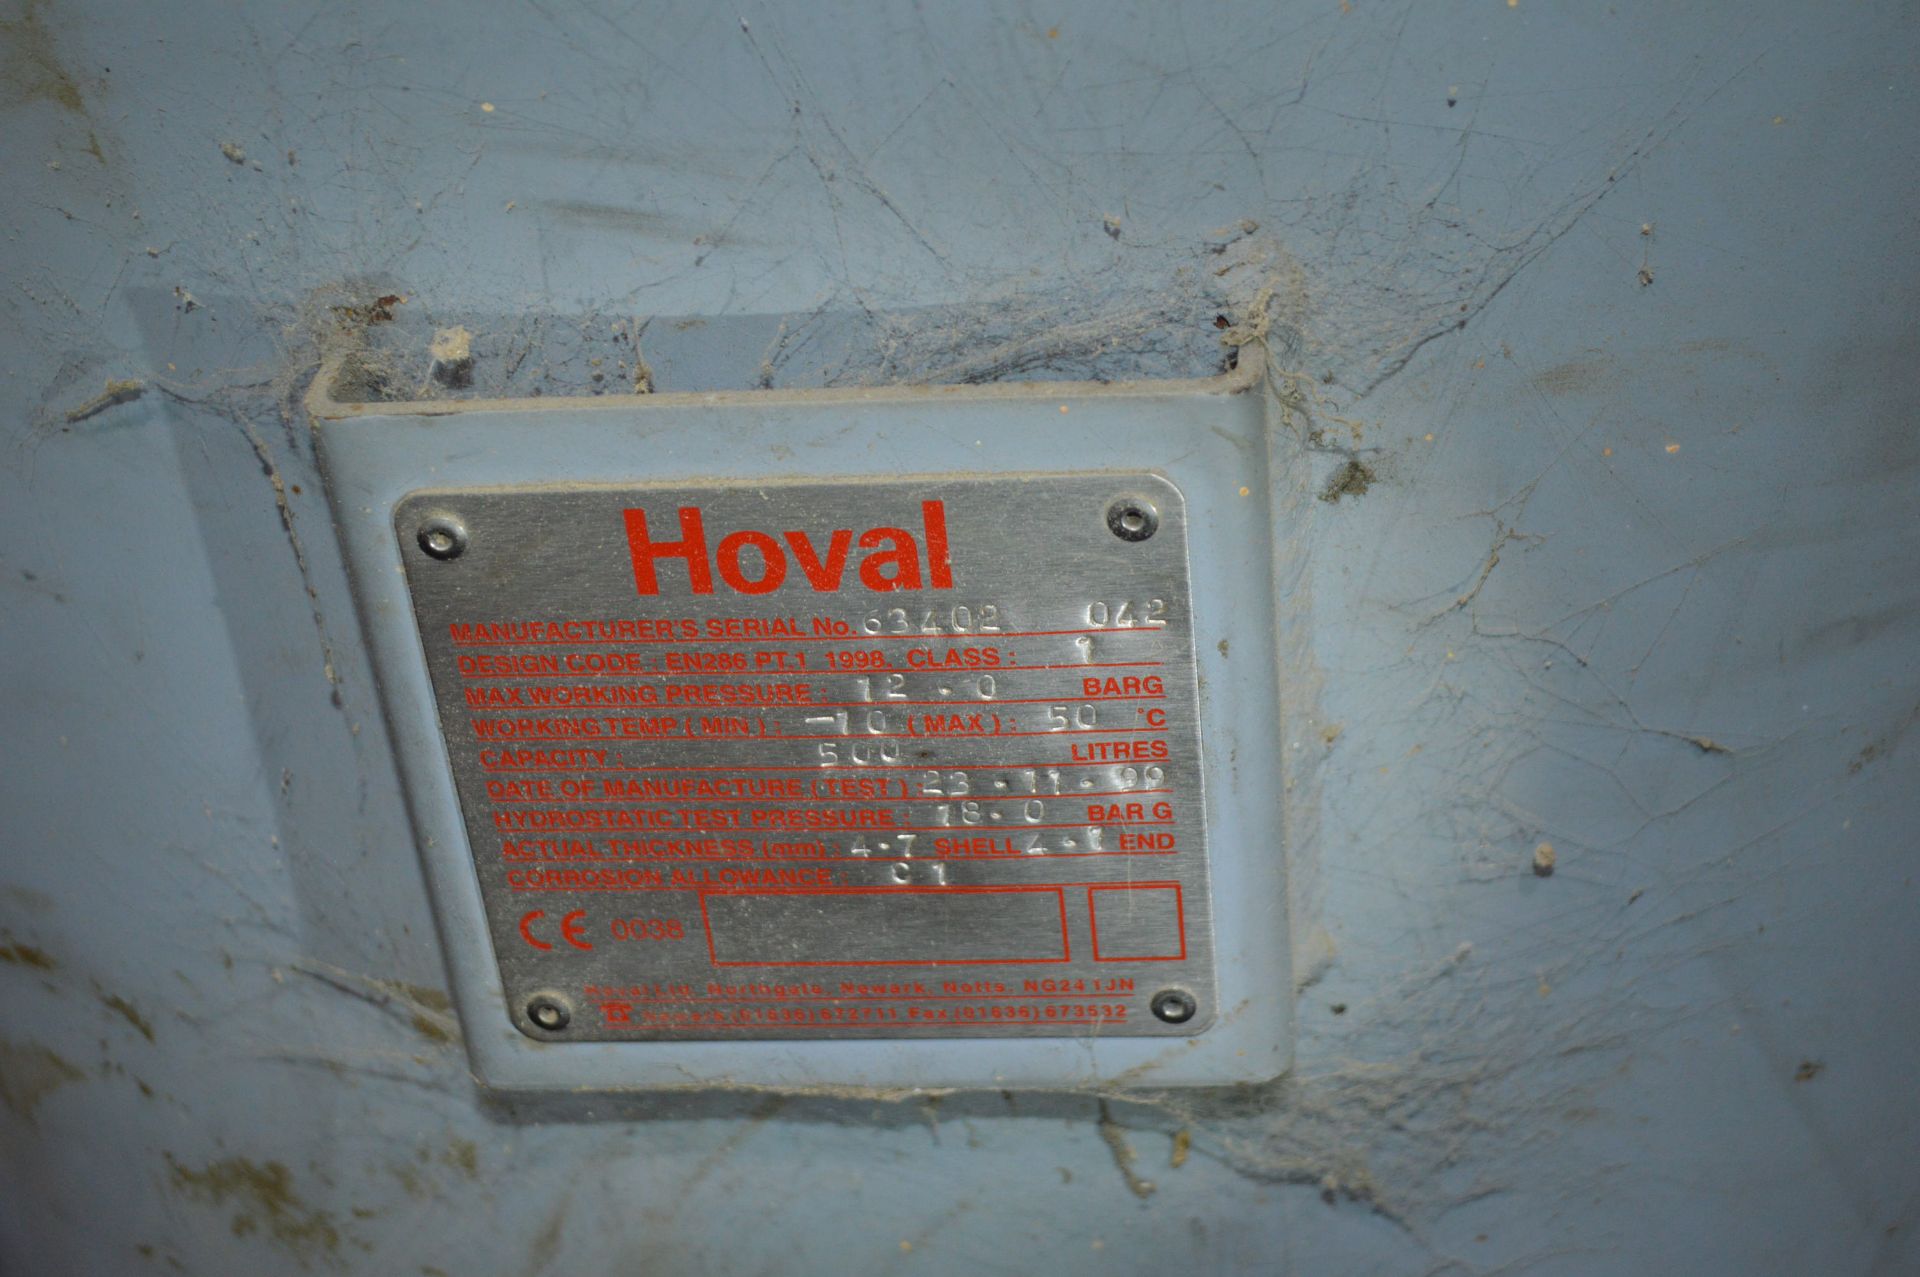 Hoval 500 litre Vertical Welded Steel Air Receiver, serial no. 63042 042, approx. 650mm dia. x 1. - Image 2 of 2